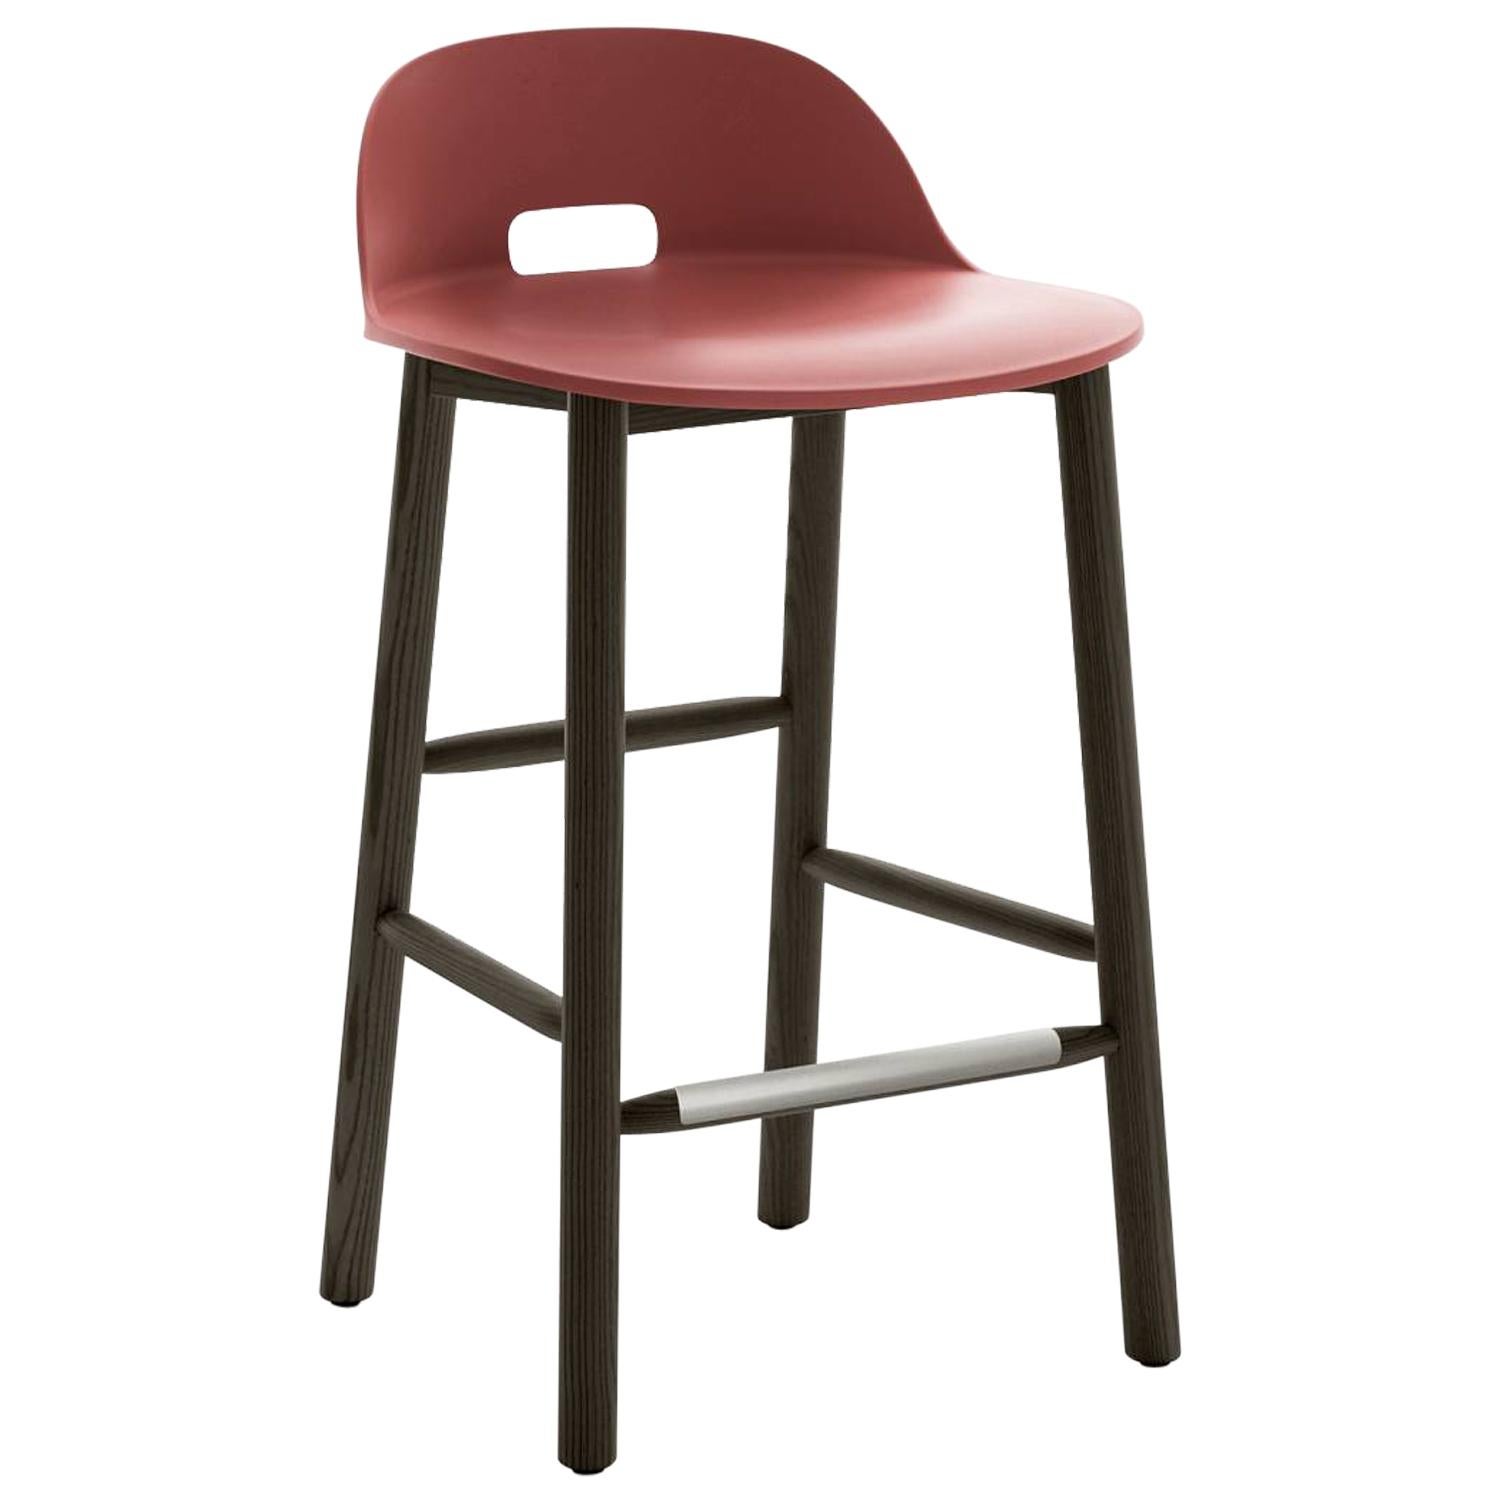 Emeco Alfi Counter Stool in Red and Dark Ash with Low Back by Jasper Morrison For Sale